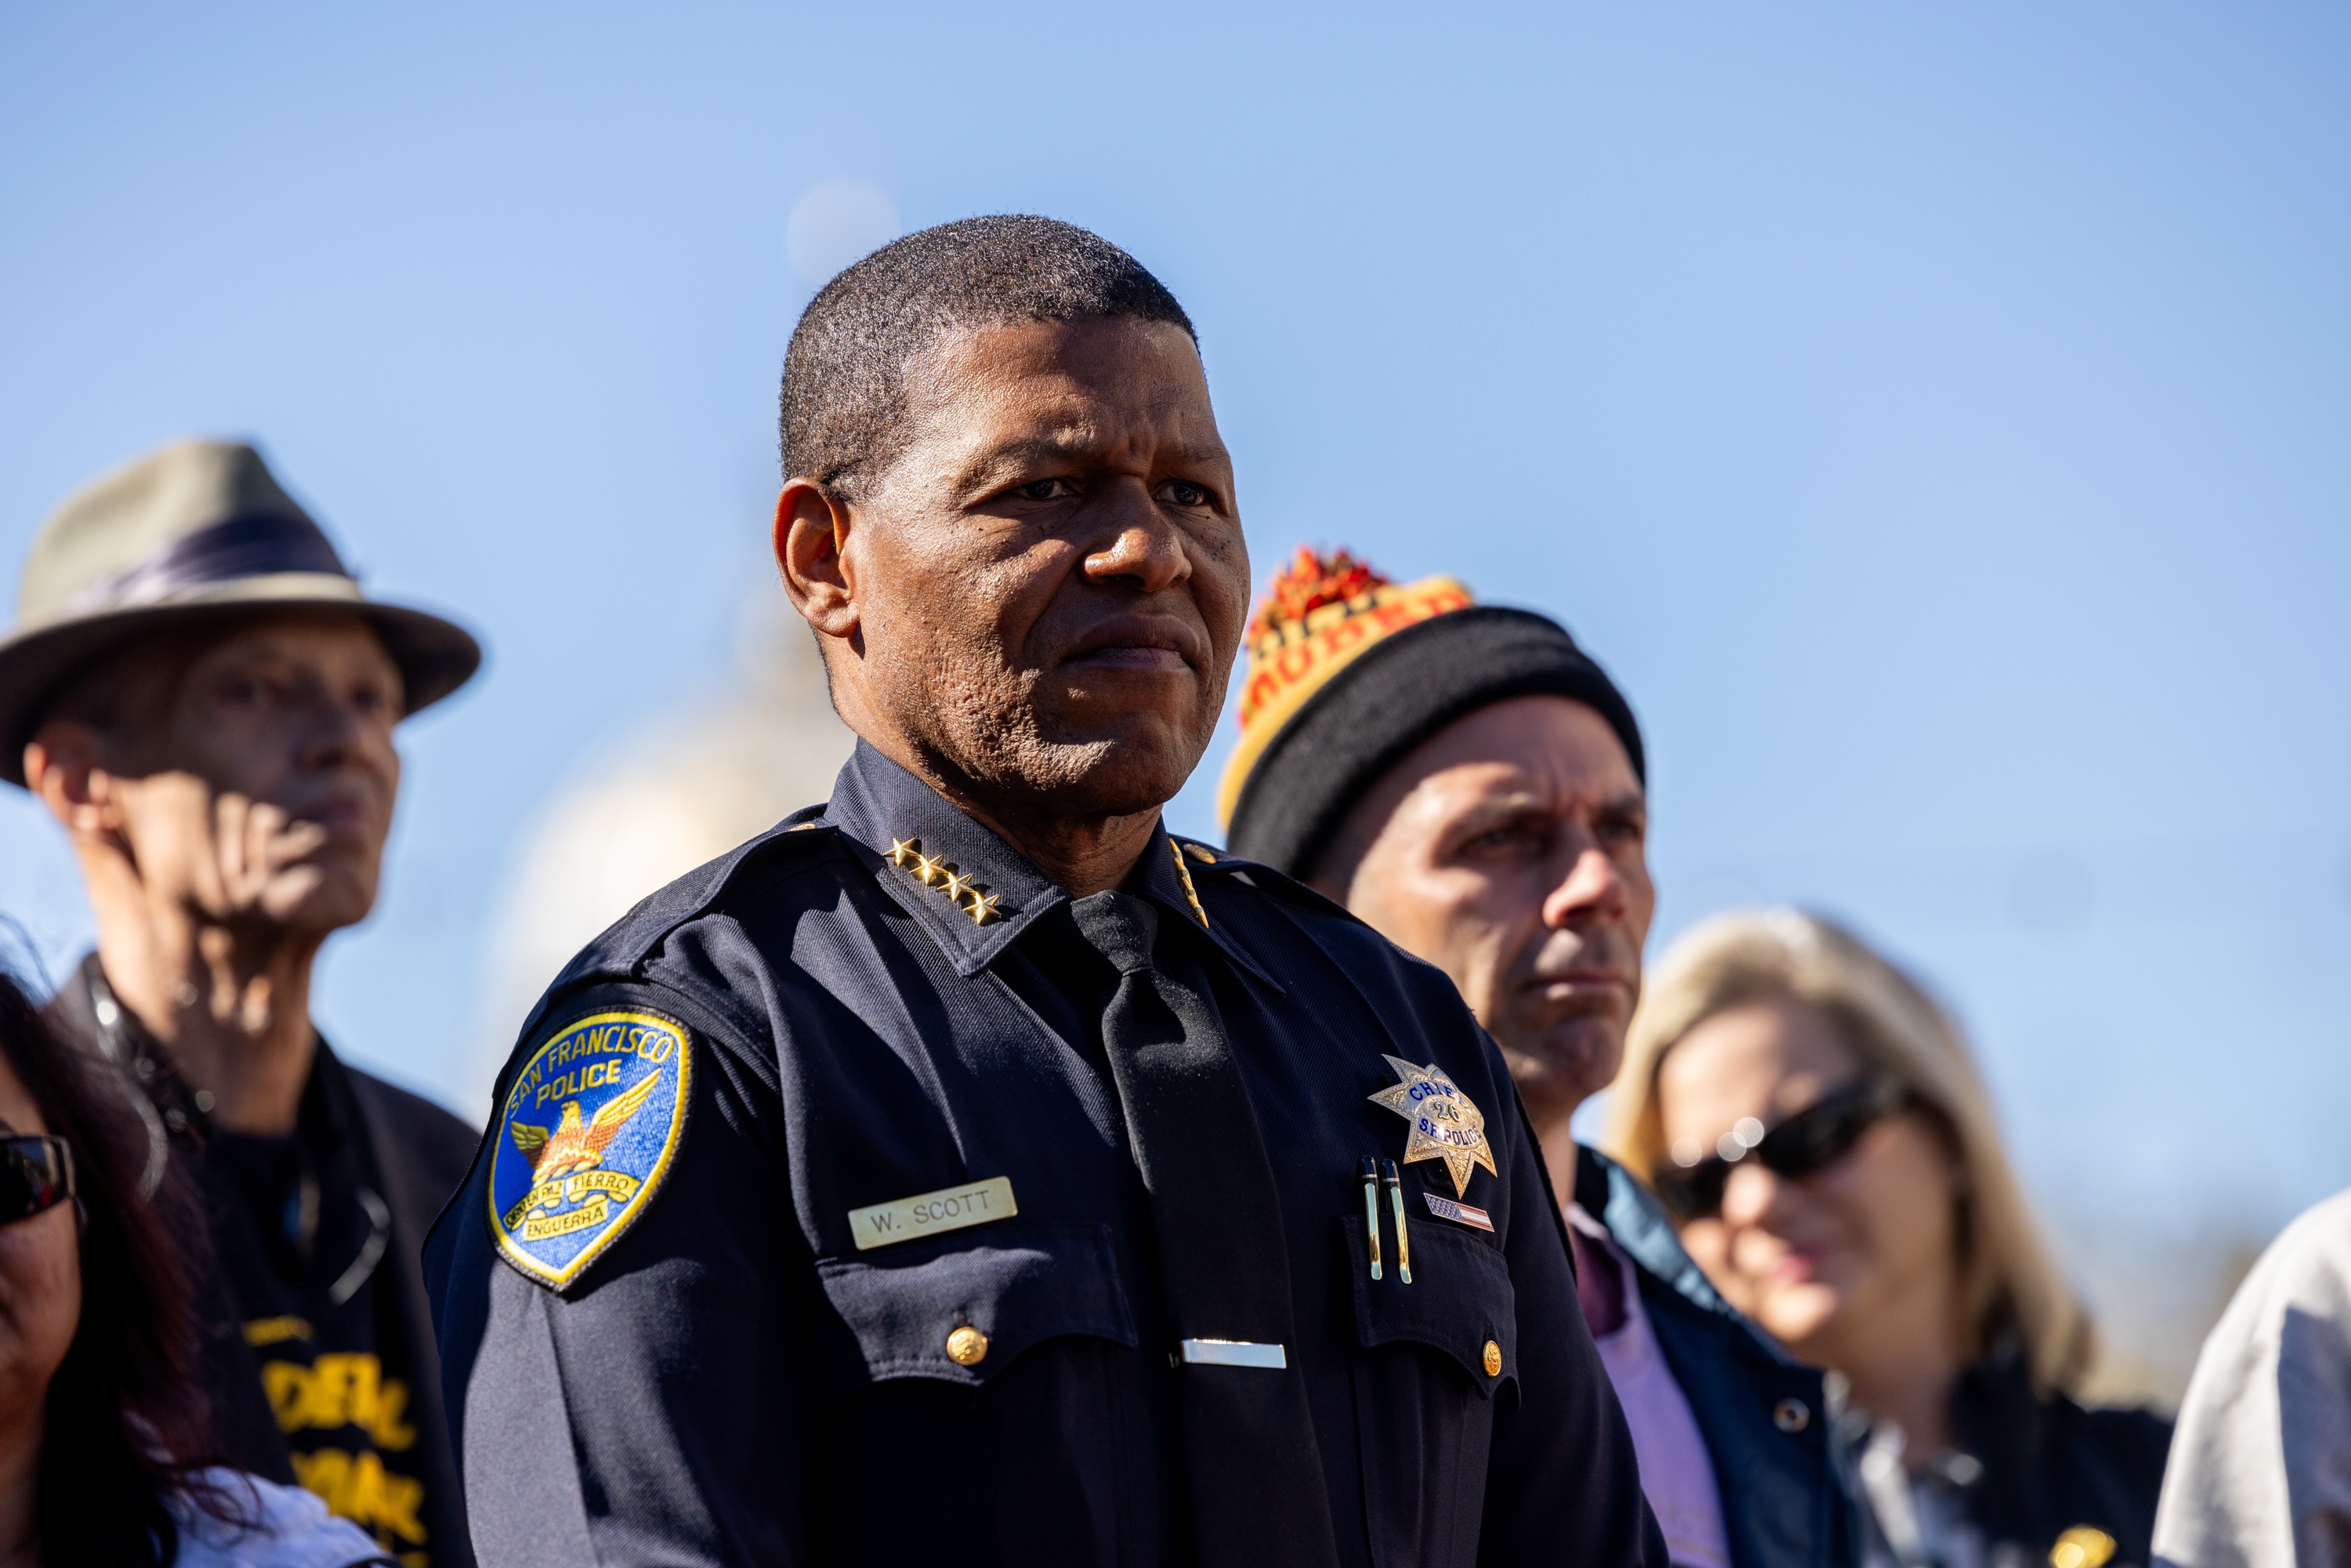 San Francisco Police Department Police Chief Bill Scott, wearing a police uniform looks into the distance with civilians standing behind him. Scott joined Mayor London Breed, elected officials, Tenderloin residents, and community partners to celebrate the reopening of the U.N Plaza which included a skateboard park.